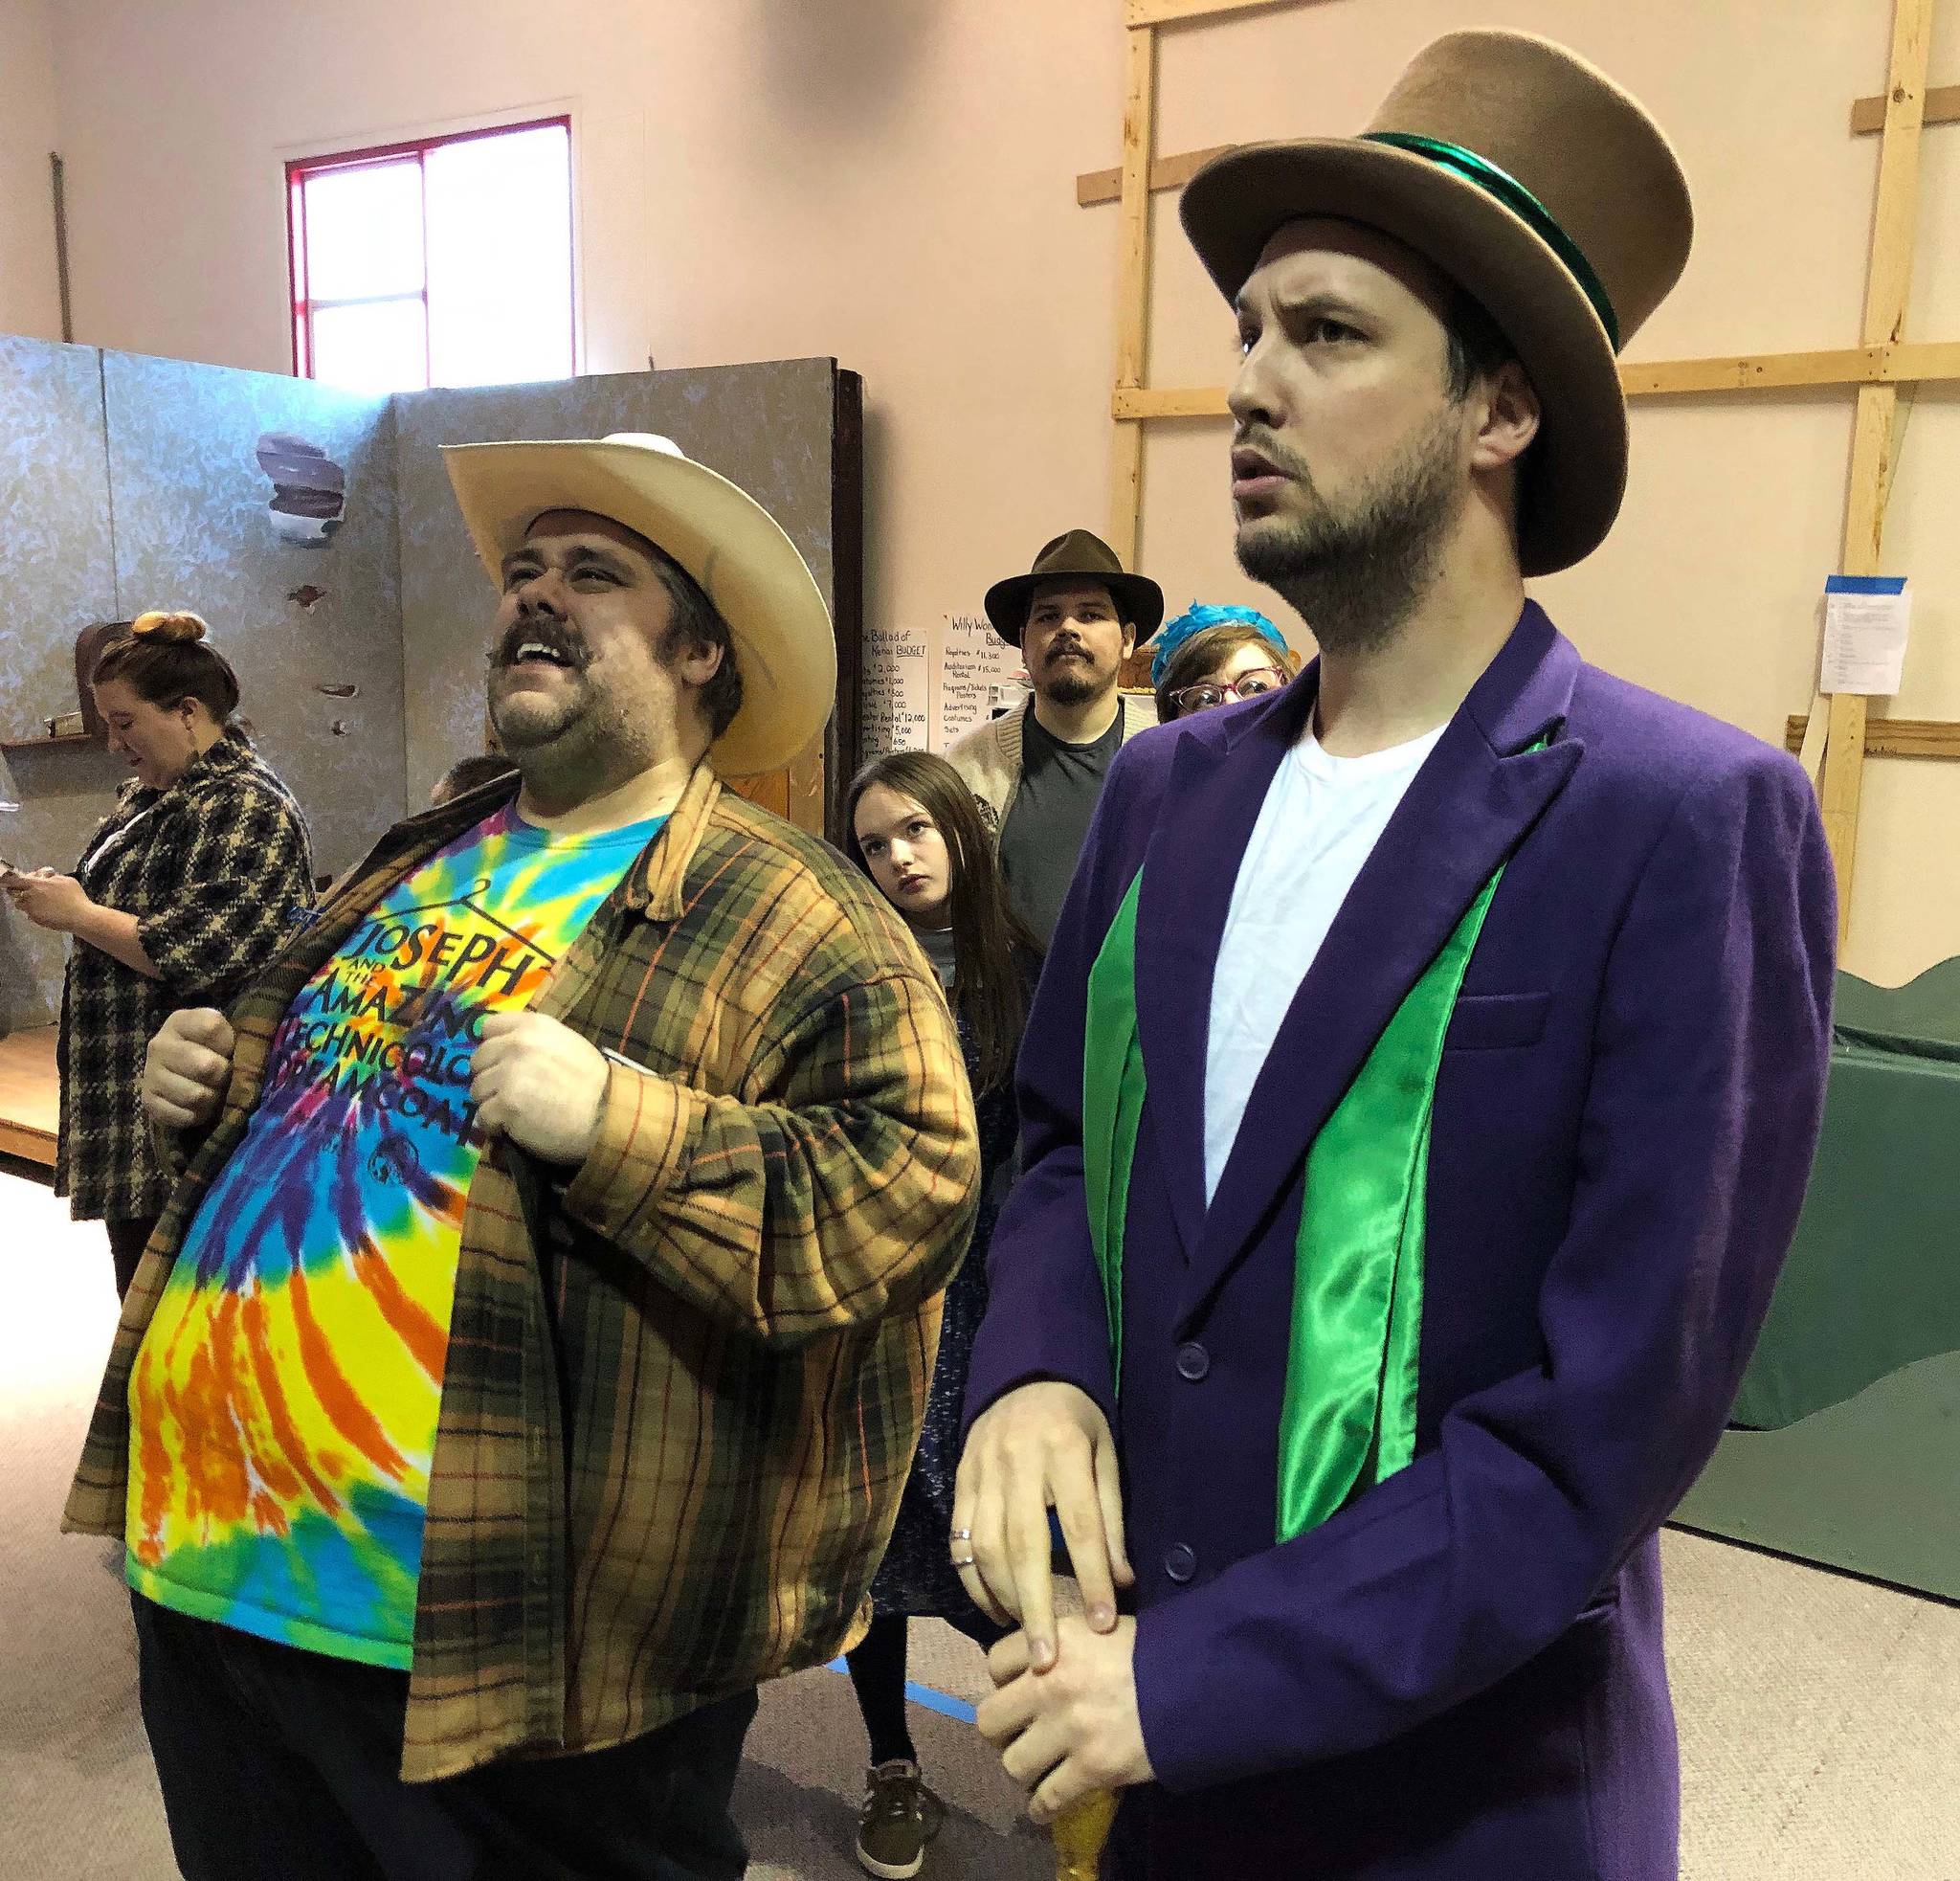 Peninsula actors Ian McEwen (left) and Spencer McAuliffe rehearse a scene from “Willy Wonka” on Saturday, Feb. 9 in Soldotna. McEwen portrays “Mr. Salt”, the enterprising father of one of the lucky golden ticket holders, while McAuliffe plays the eccentric Willy Wonka. (Photo by Joey Klecka)